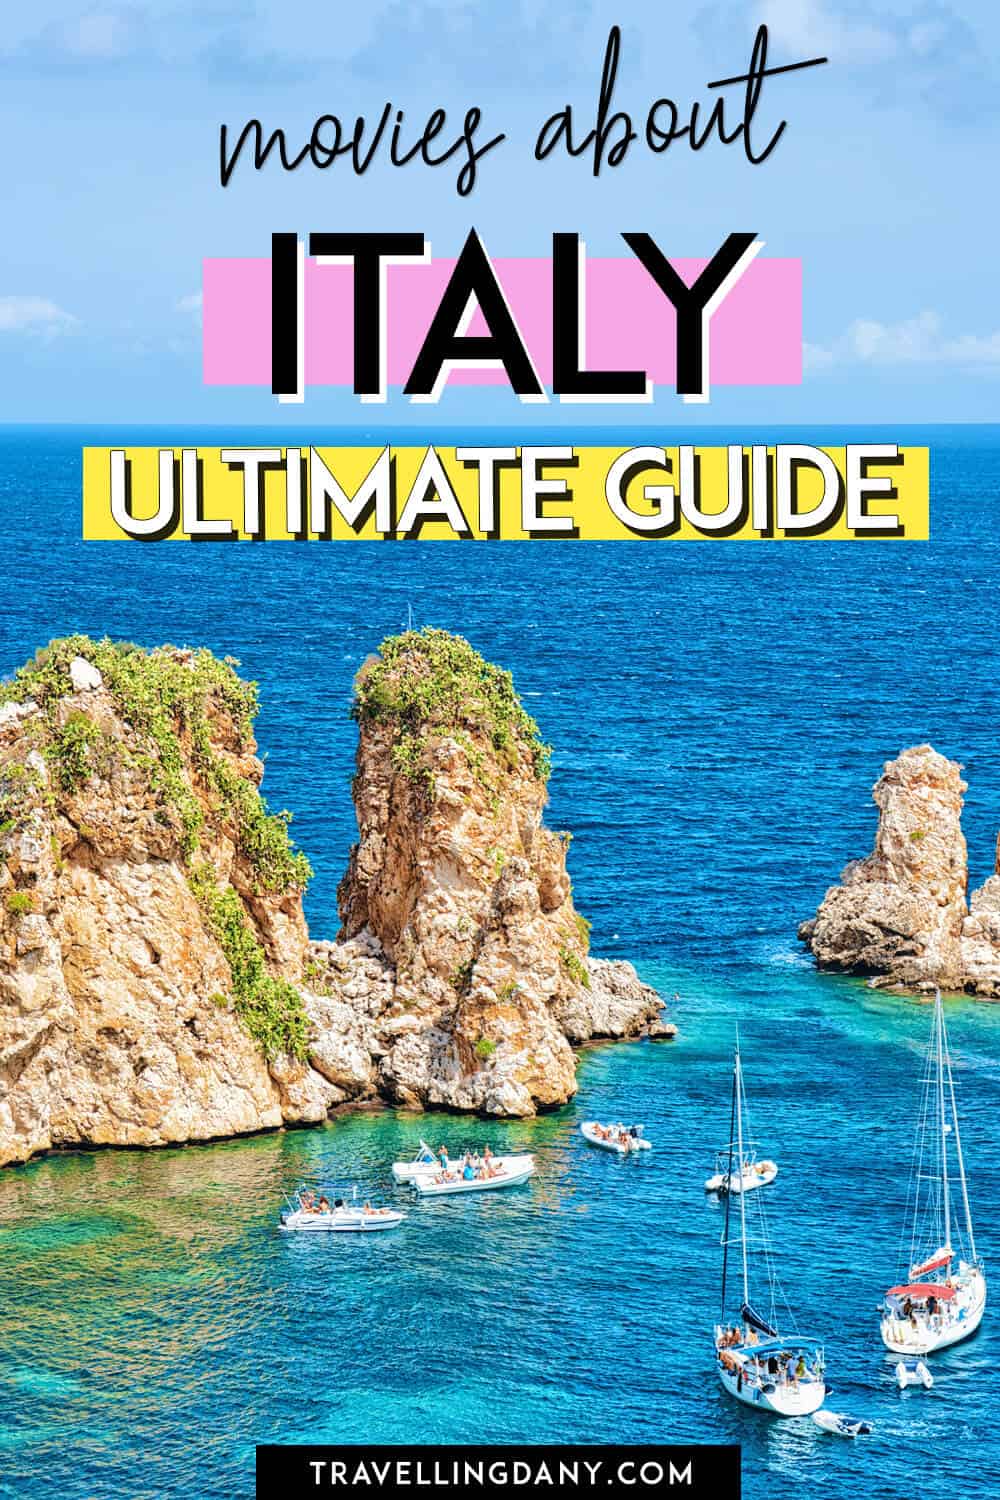 Looking to add a splash of La Dolce Vita to your movie night? Then look no further! We’ve rounded up 37 stunning flicks set in Italy that are guaranteed to transport you straight to the land of cobbled streets, ancient architecture, and (of course) pasta. From the classic Italian movies that took the world by storm, to hidden gems that deserve to be rediscovered, this list has got you covered. Plus, if you’re planning a trip to Italy soon, these movies will give you the perfect warm-up. Get your popcorn (or gelato) ready and let’s escape to Italy! 